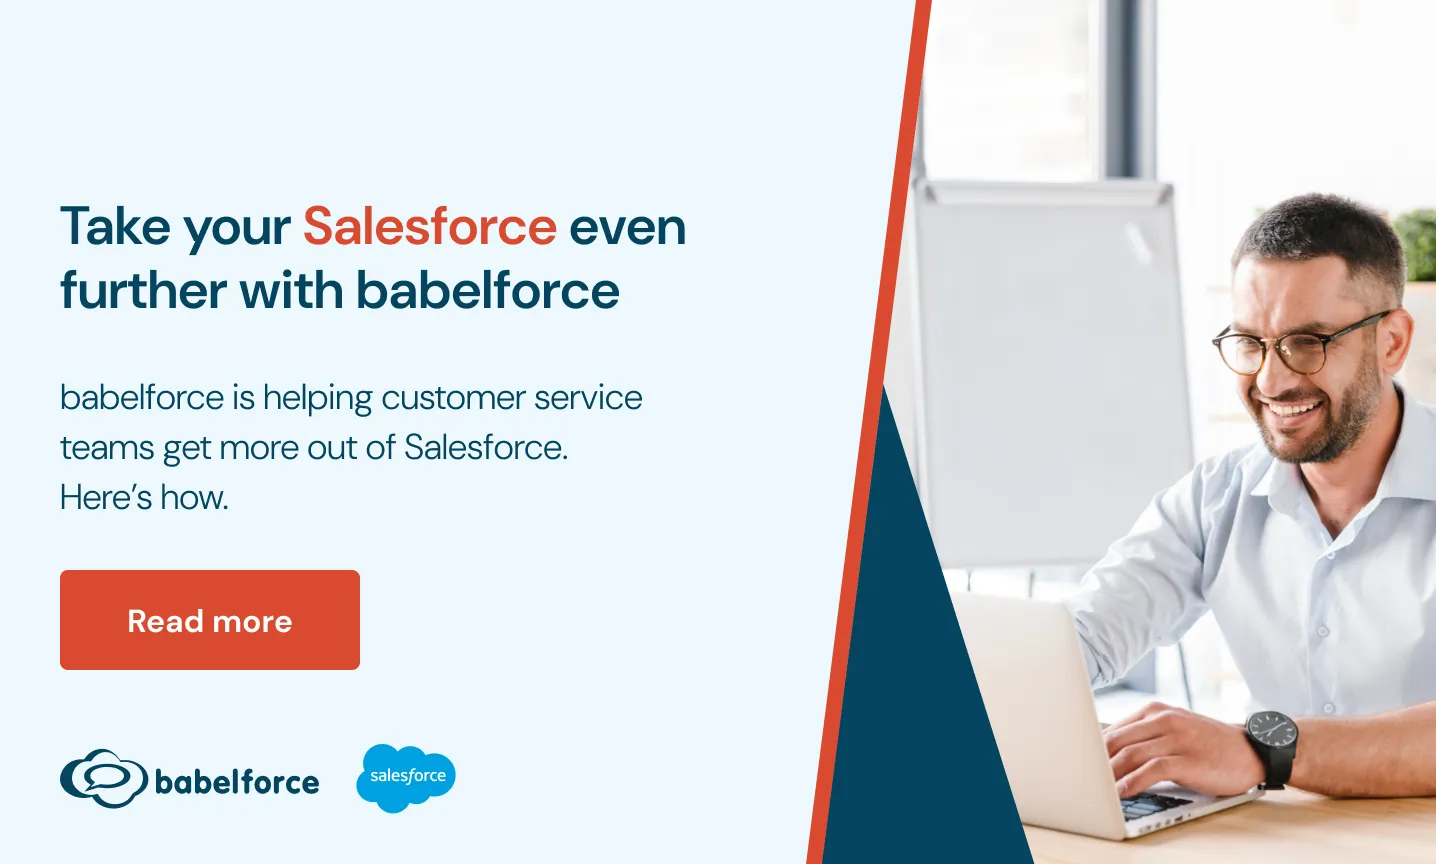 Take your Salesforce further